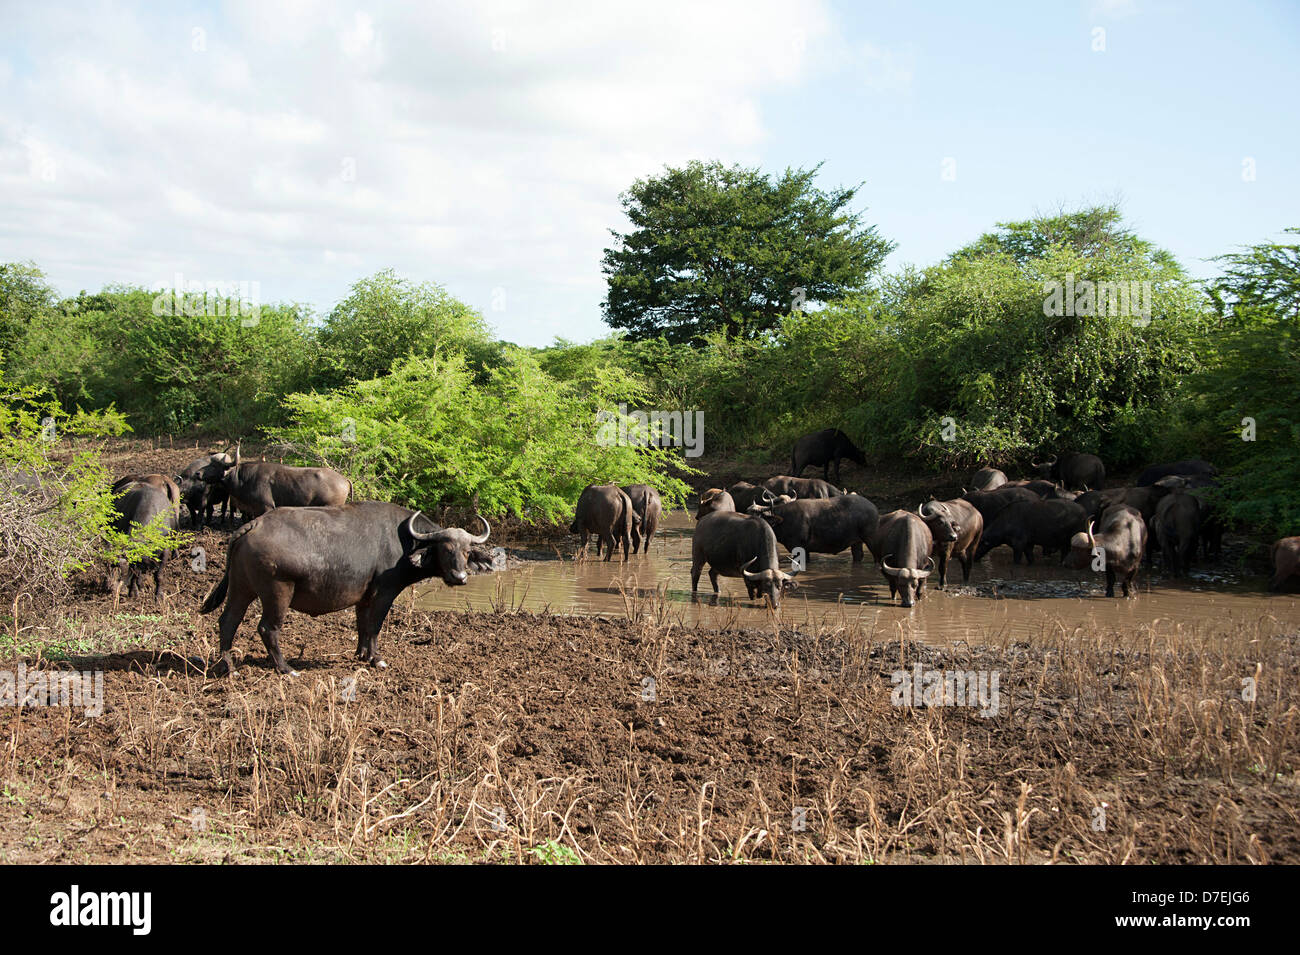 African buffaloes in muddy water in Thanda Game Reserve, South Africa. Stock Photo